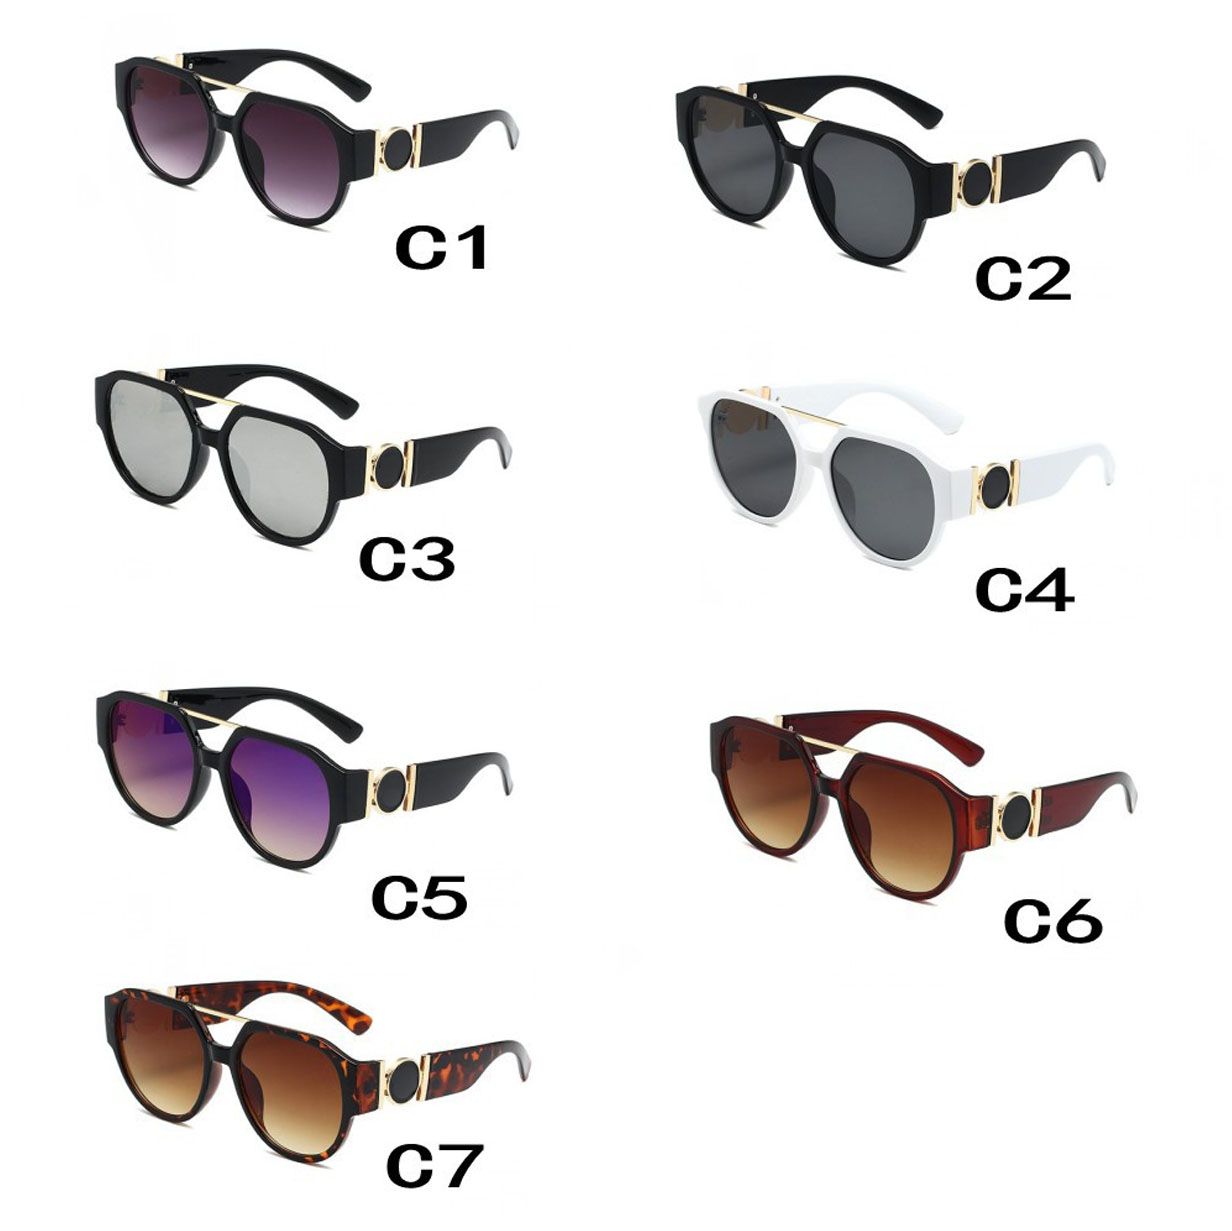 43H71,only sunglasses